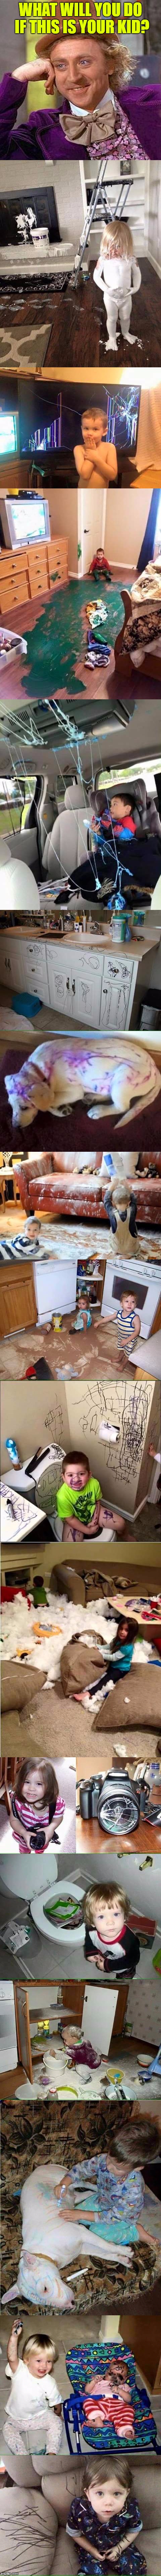 I would cry.... ❤ | WHAT WILL YOU DO IF THIS IS YOUR KID? | image tagged in kids,mischief,cute,baby,google images | made w/ Imgflip meme maker